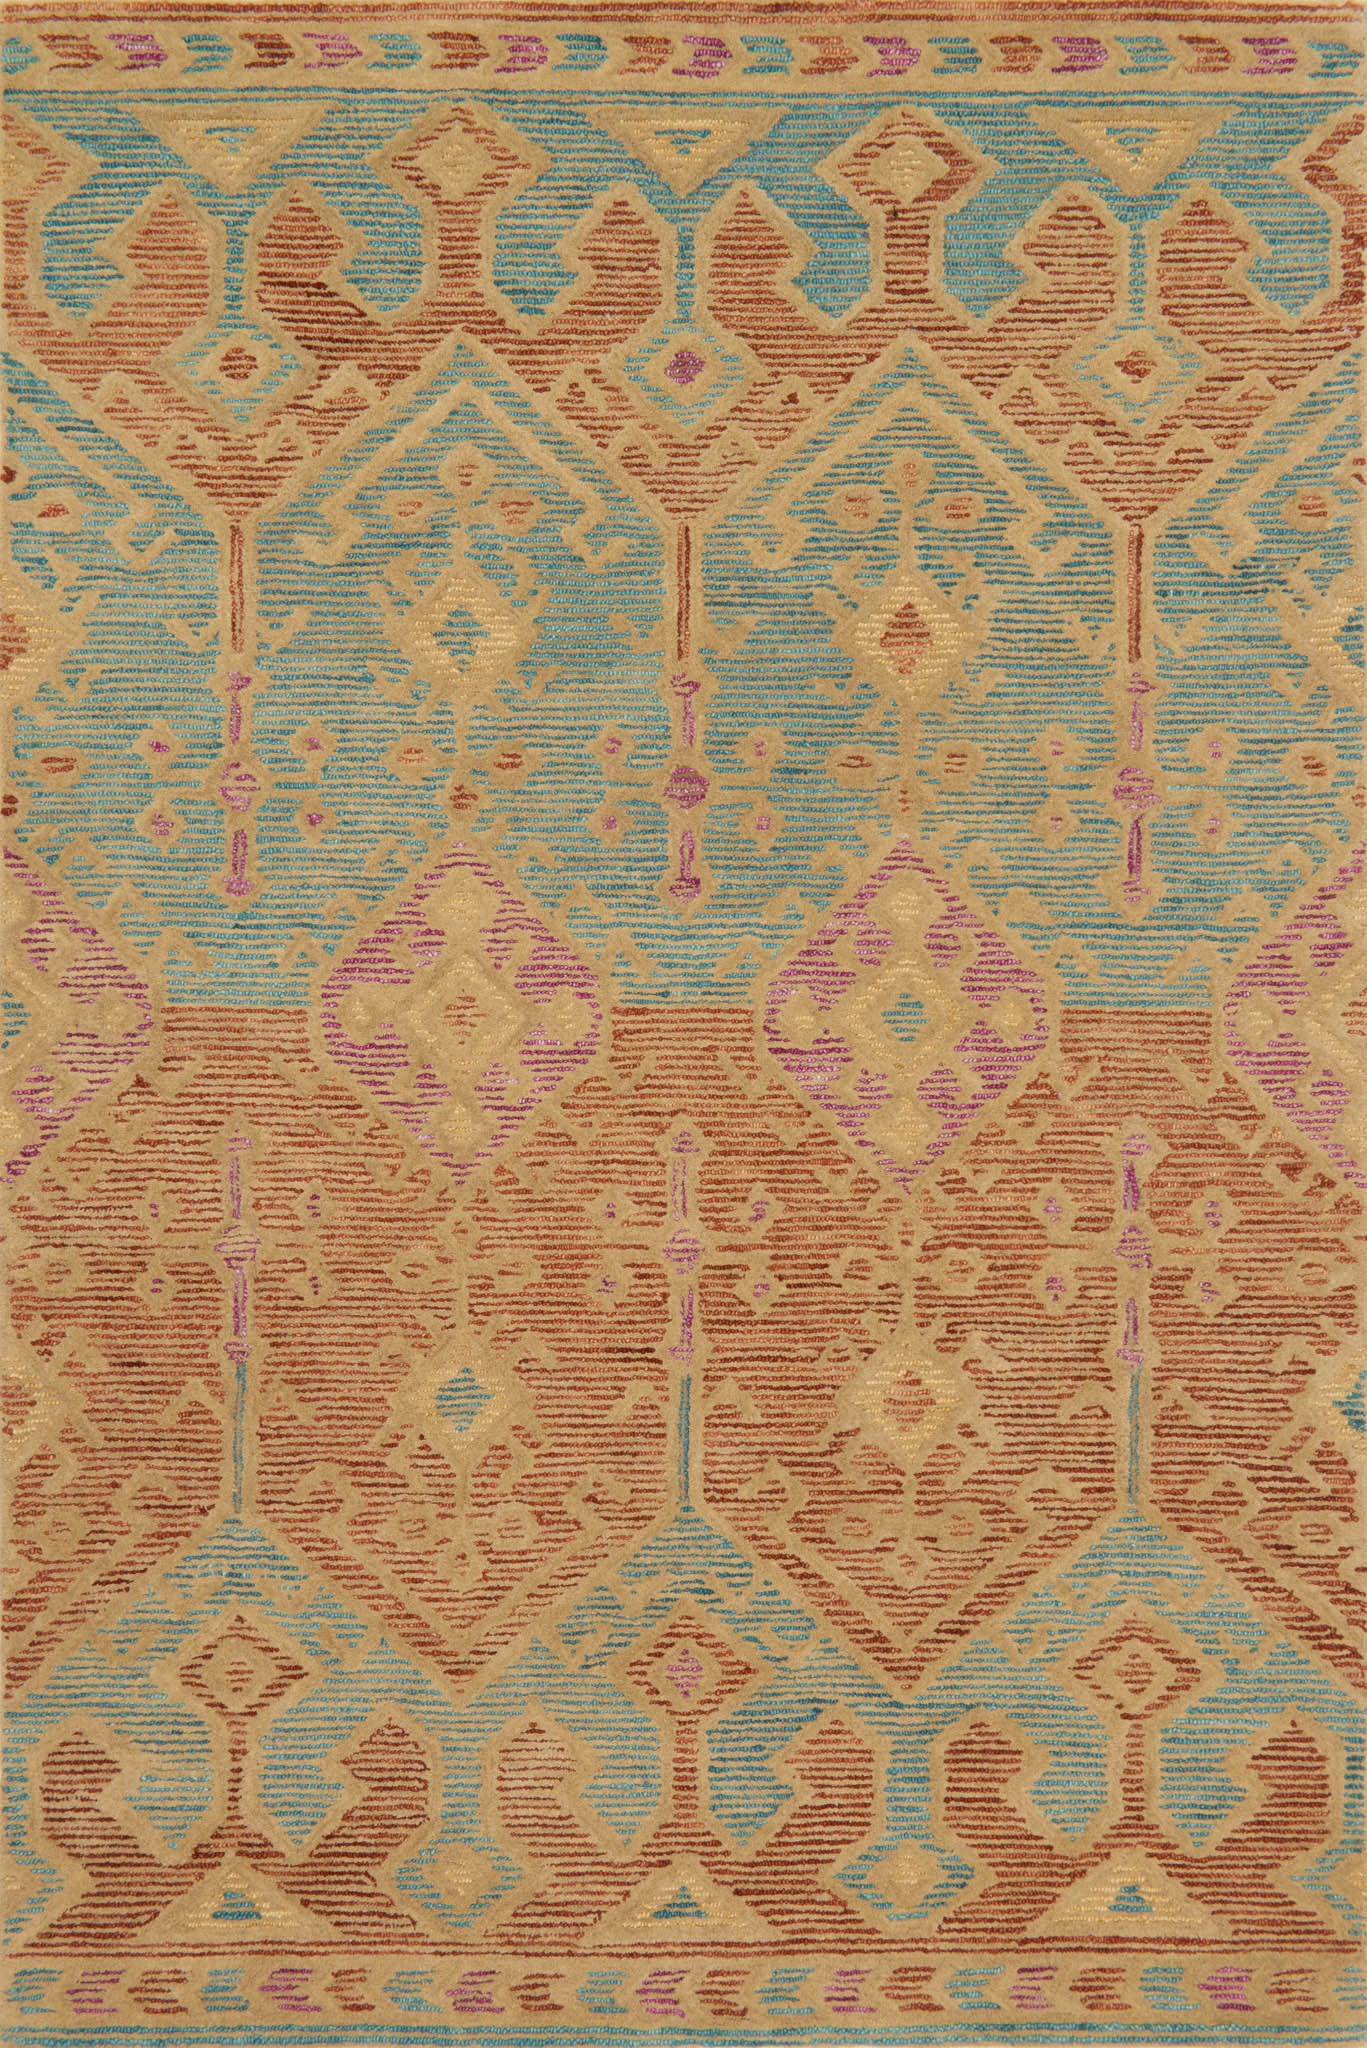 Loloi Gemology GQ-02 Spice/Teal Area Rug by Justina Blakeney main image